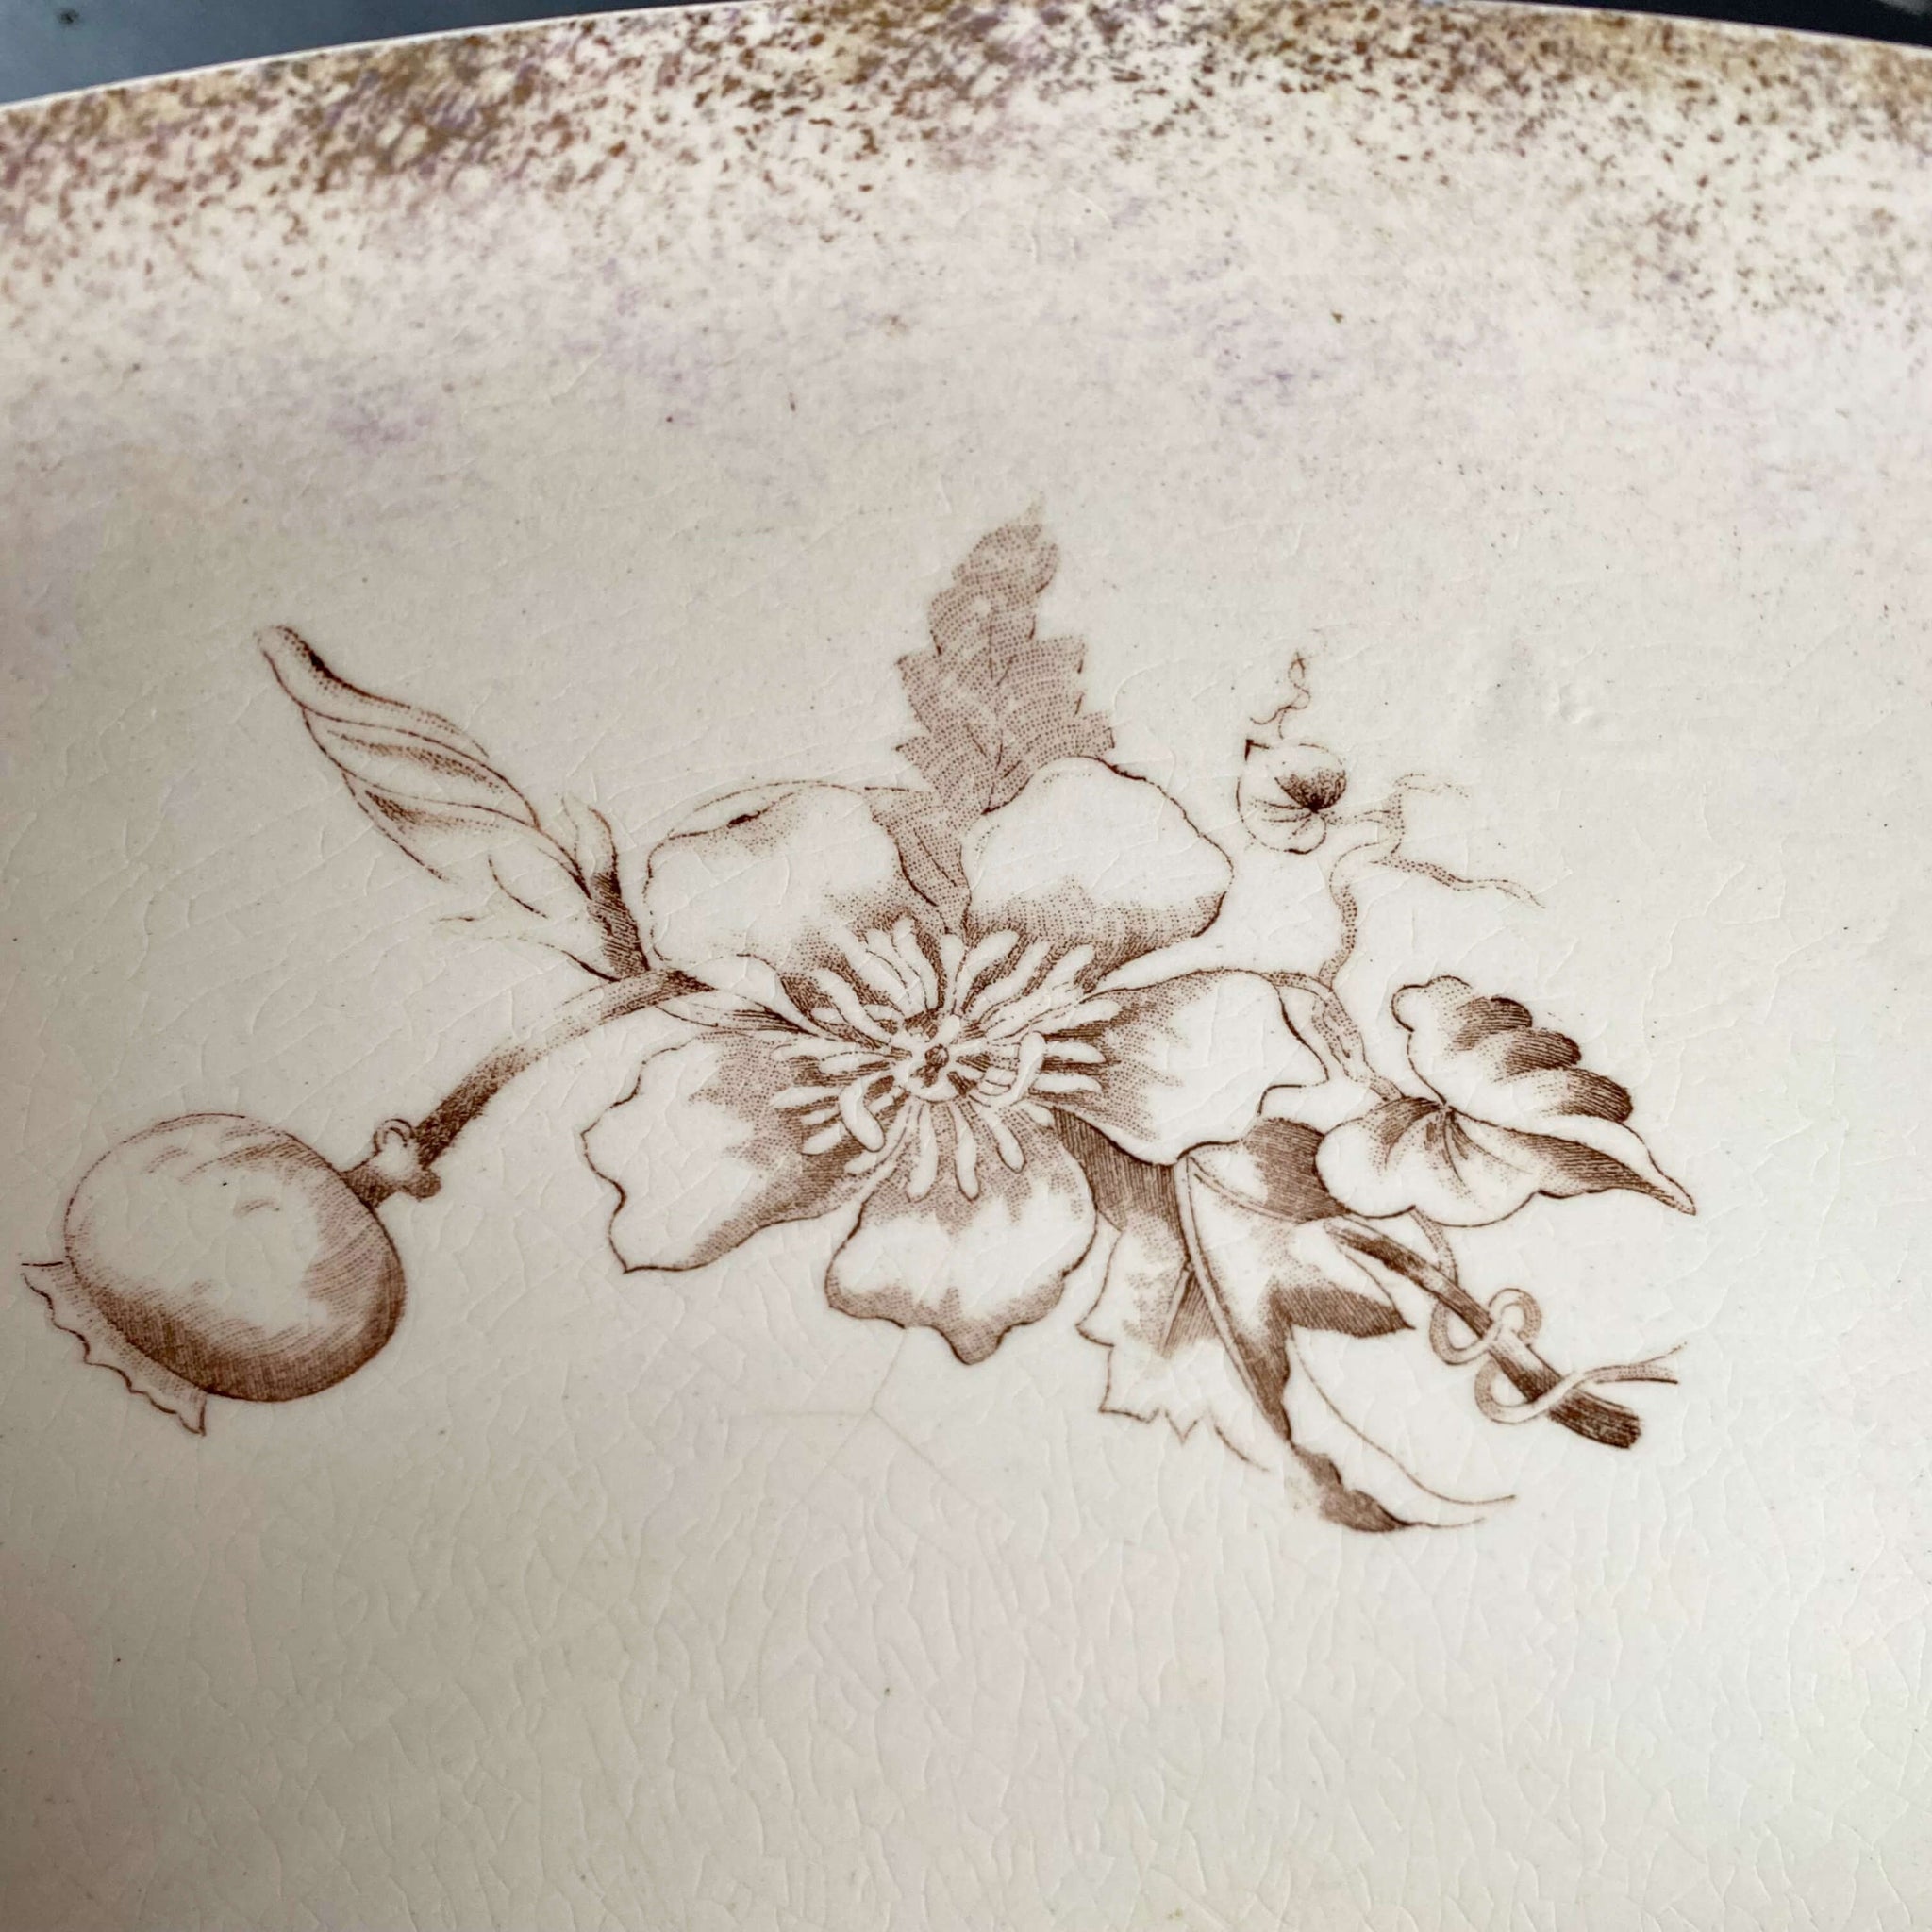 Antique Large Brown Transferware Wash Basin Bowl with Morning Glory & Mum Flowers